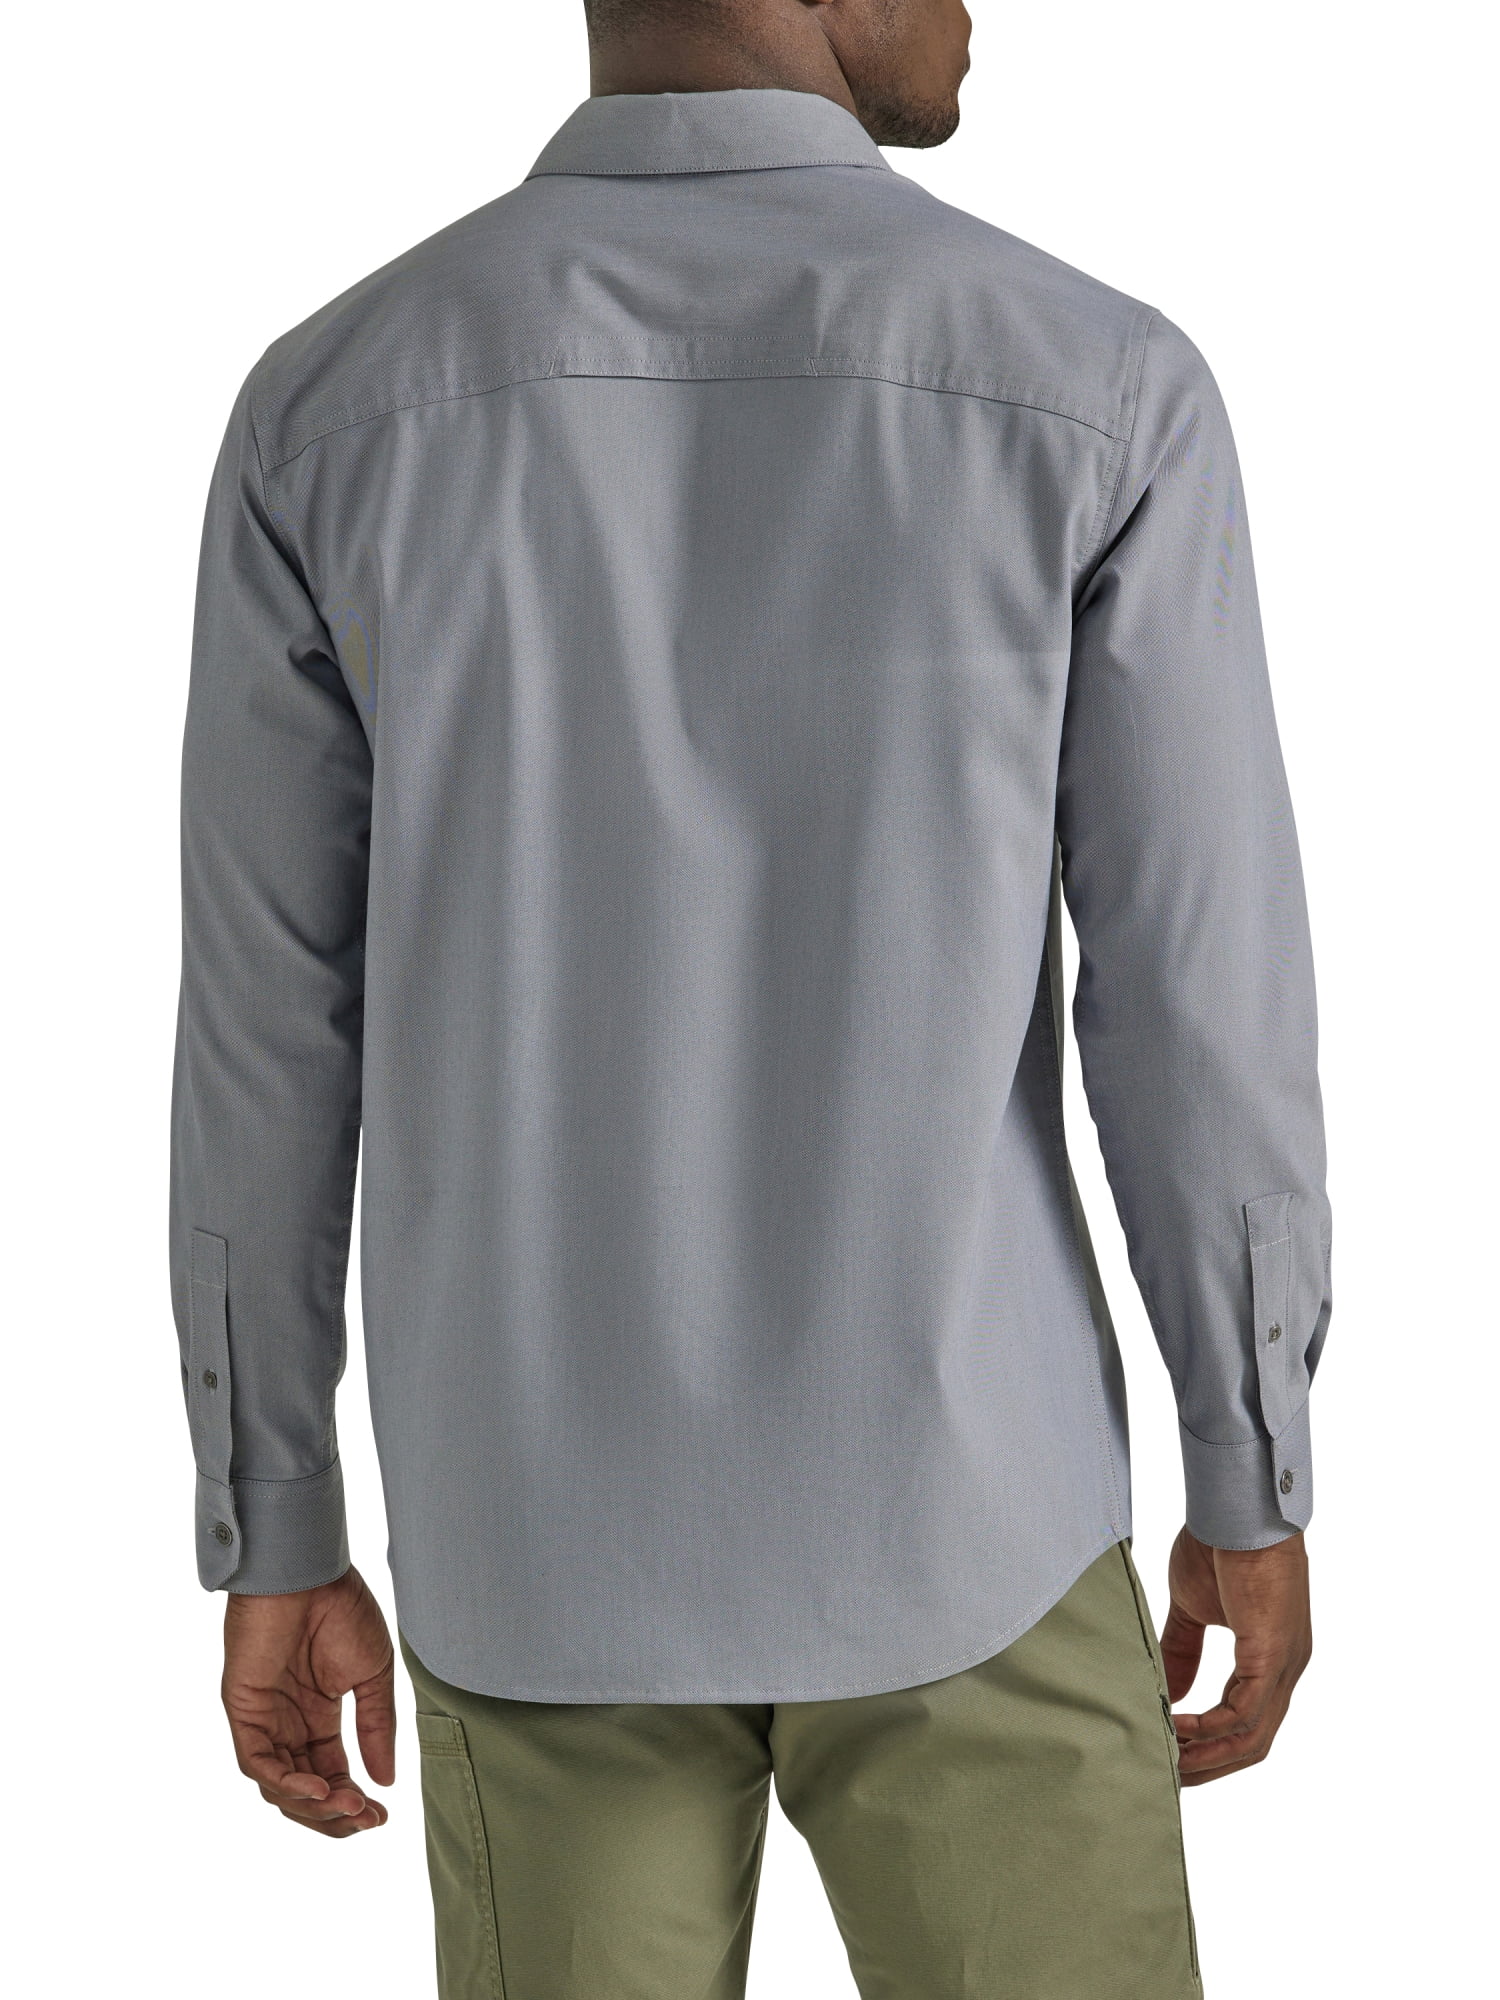 Wrangler® Men's Outdoor Long Sleeve Shirt with UPF 30+ Protection, Sizes  S-5XL 